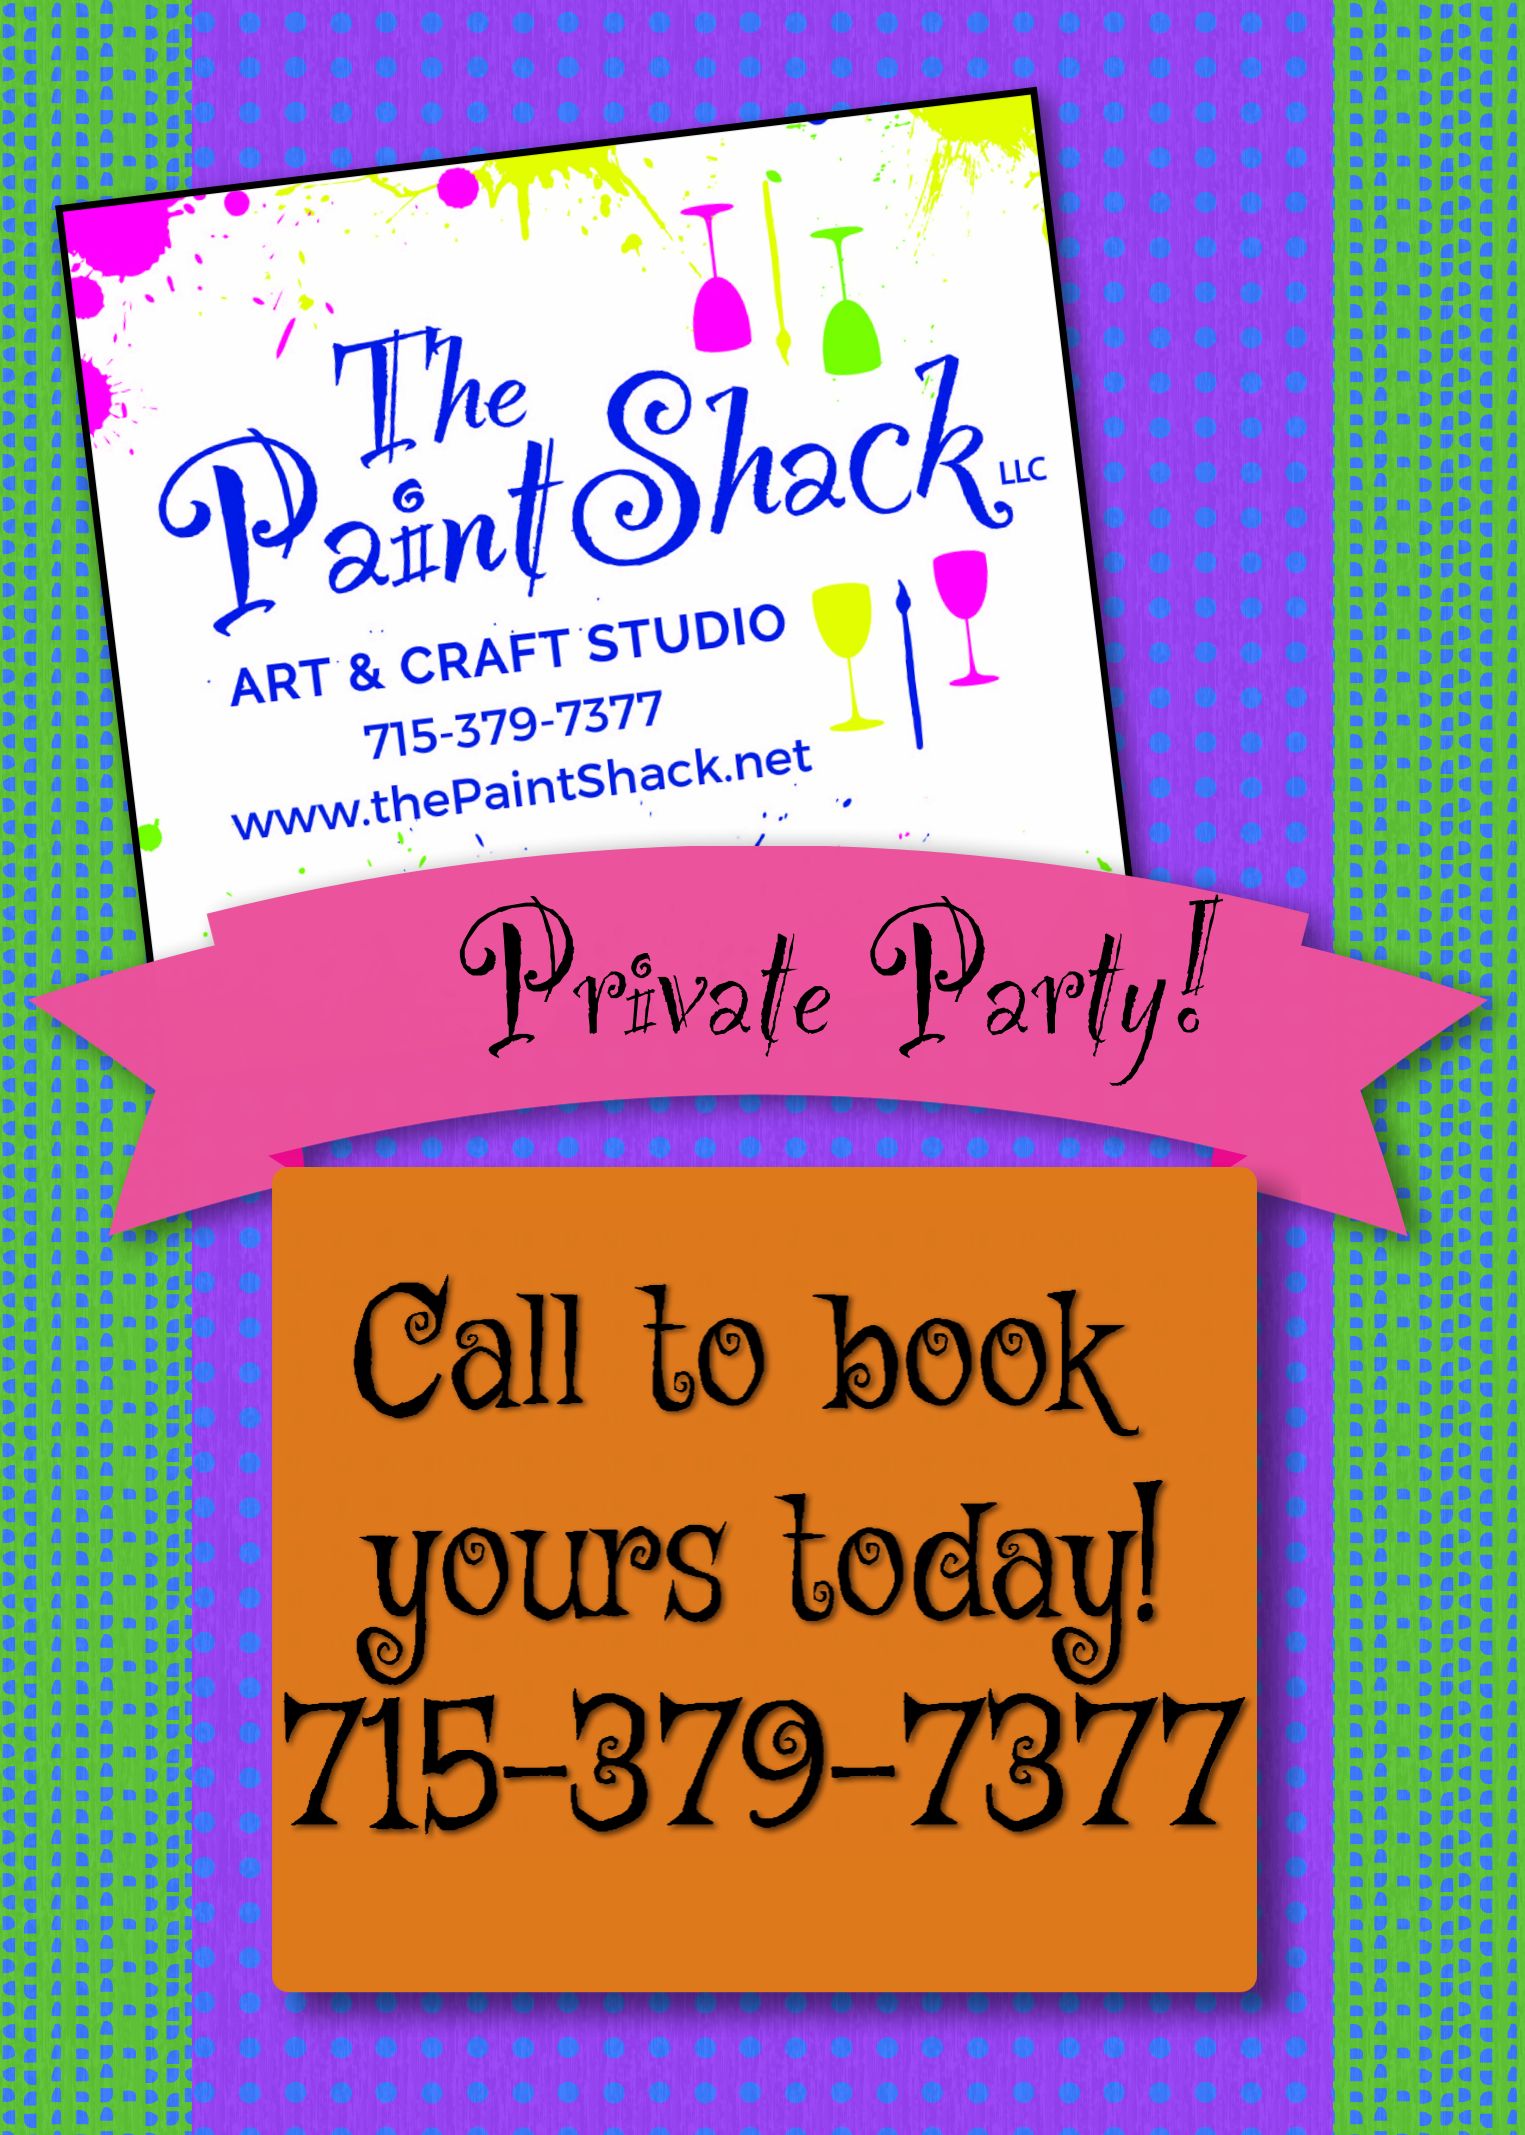 Request your private party!